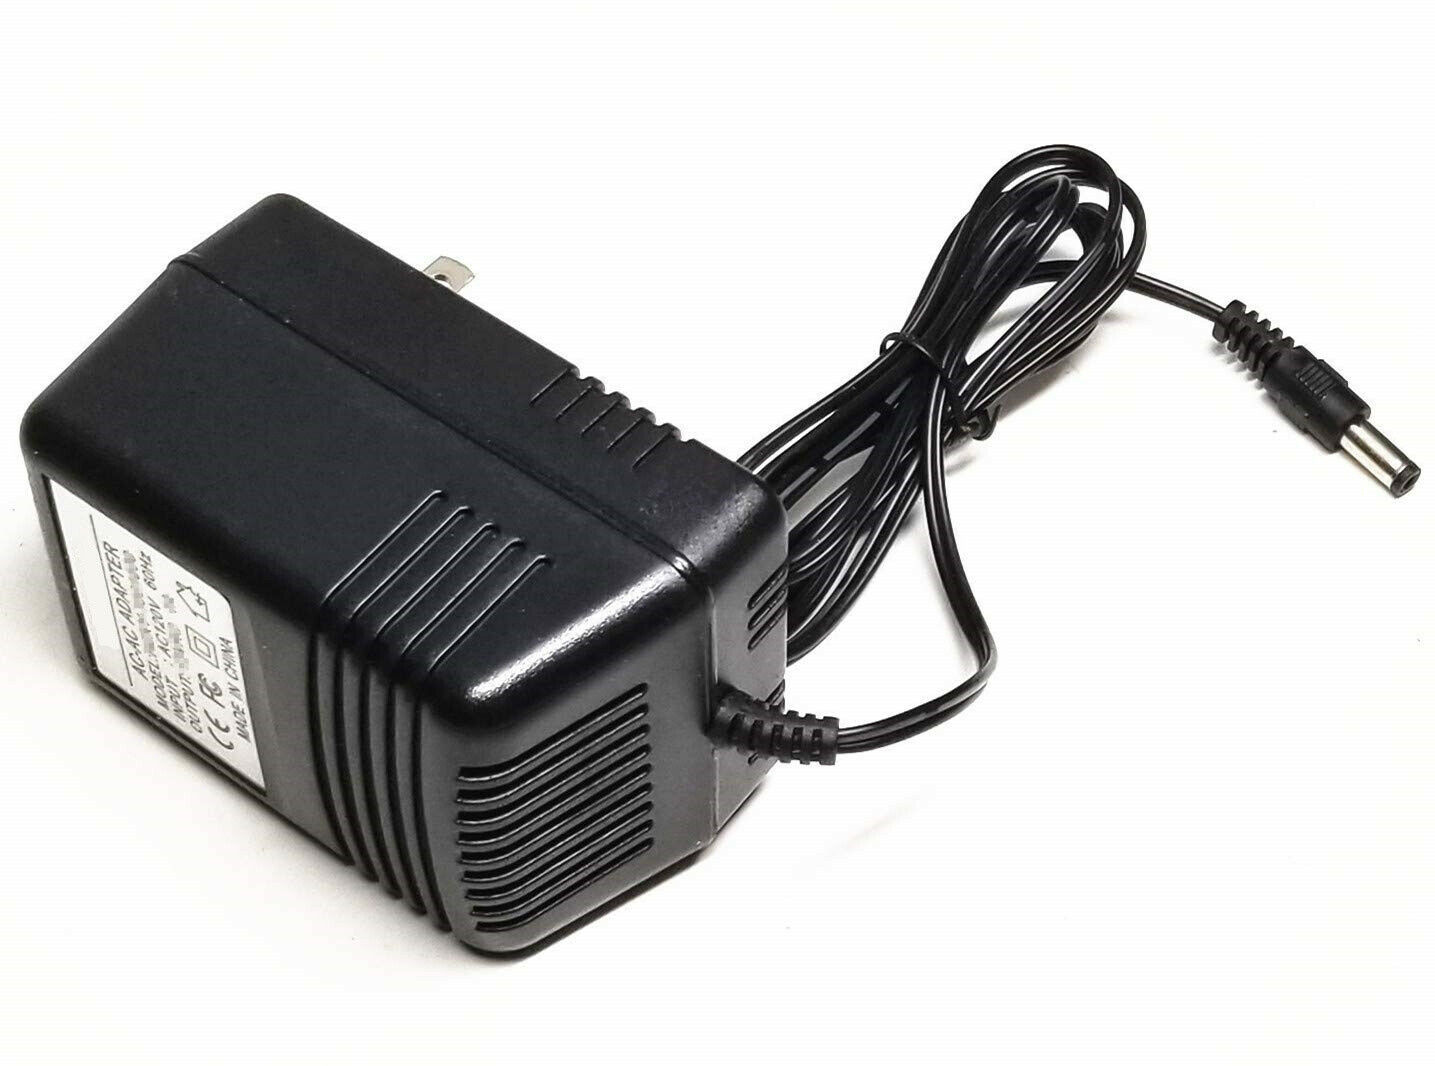 AC/DC Adapter Wall Charger Power Supply Cord For Canon Elura 100 85 Camcorder Brand New, High Quality AC Power Adapter